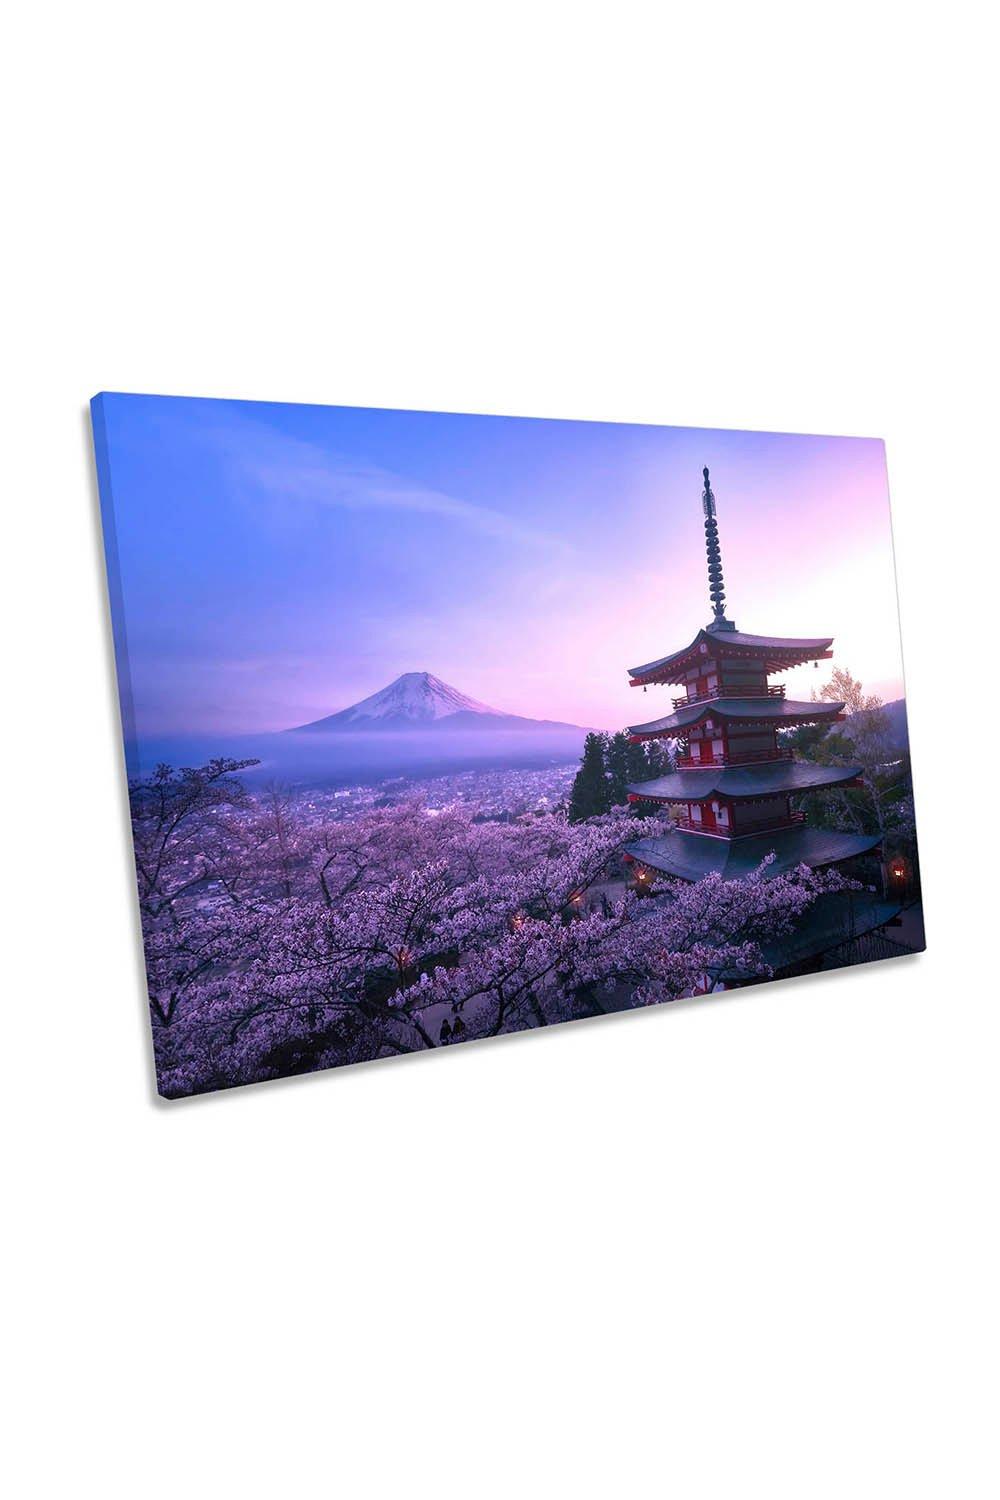 Mount Fuji Japan Blossom Sunset Canvas Wall Art Picture Print